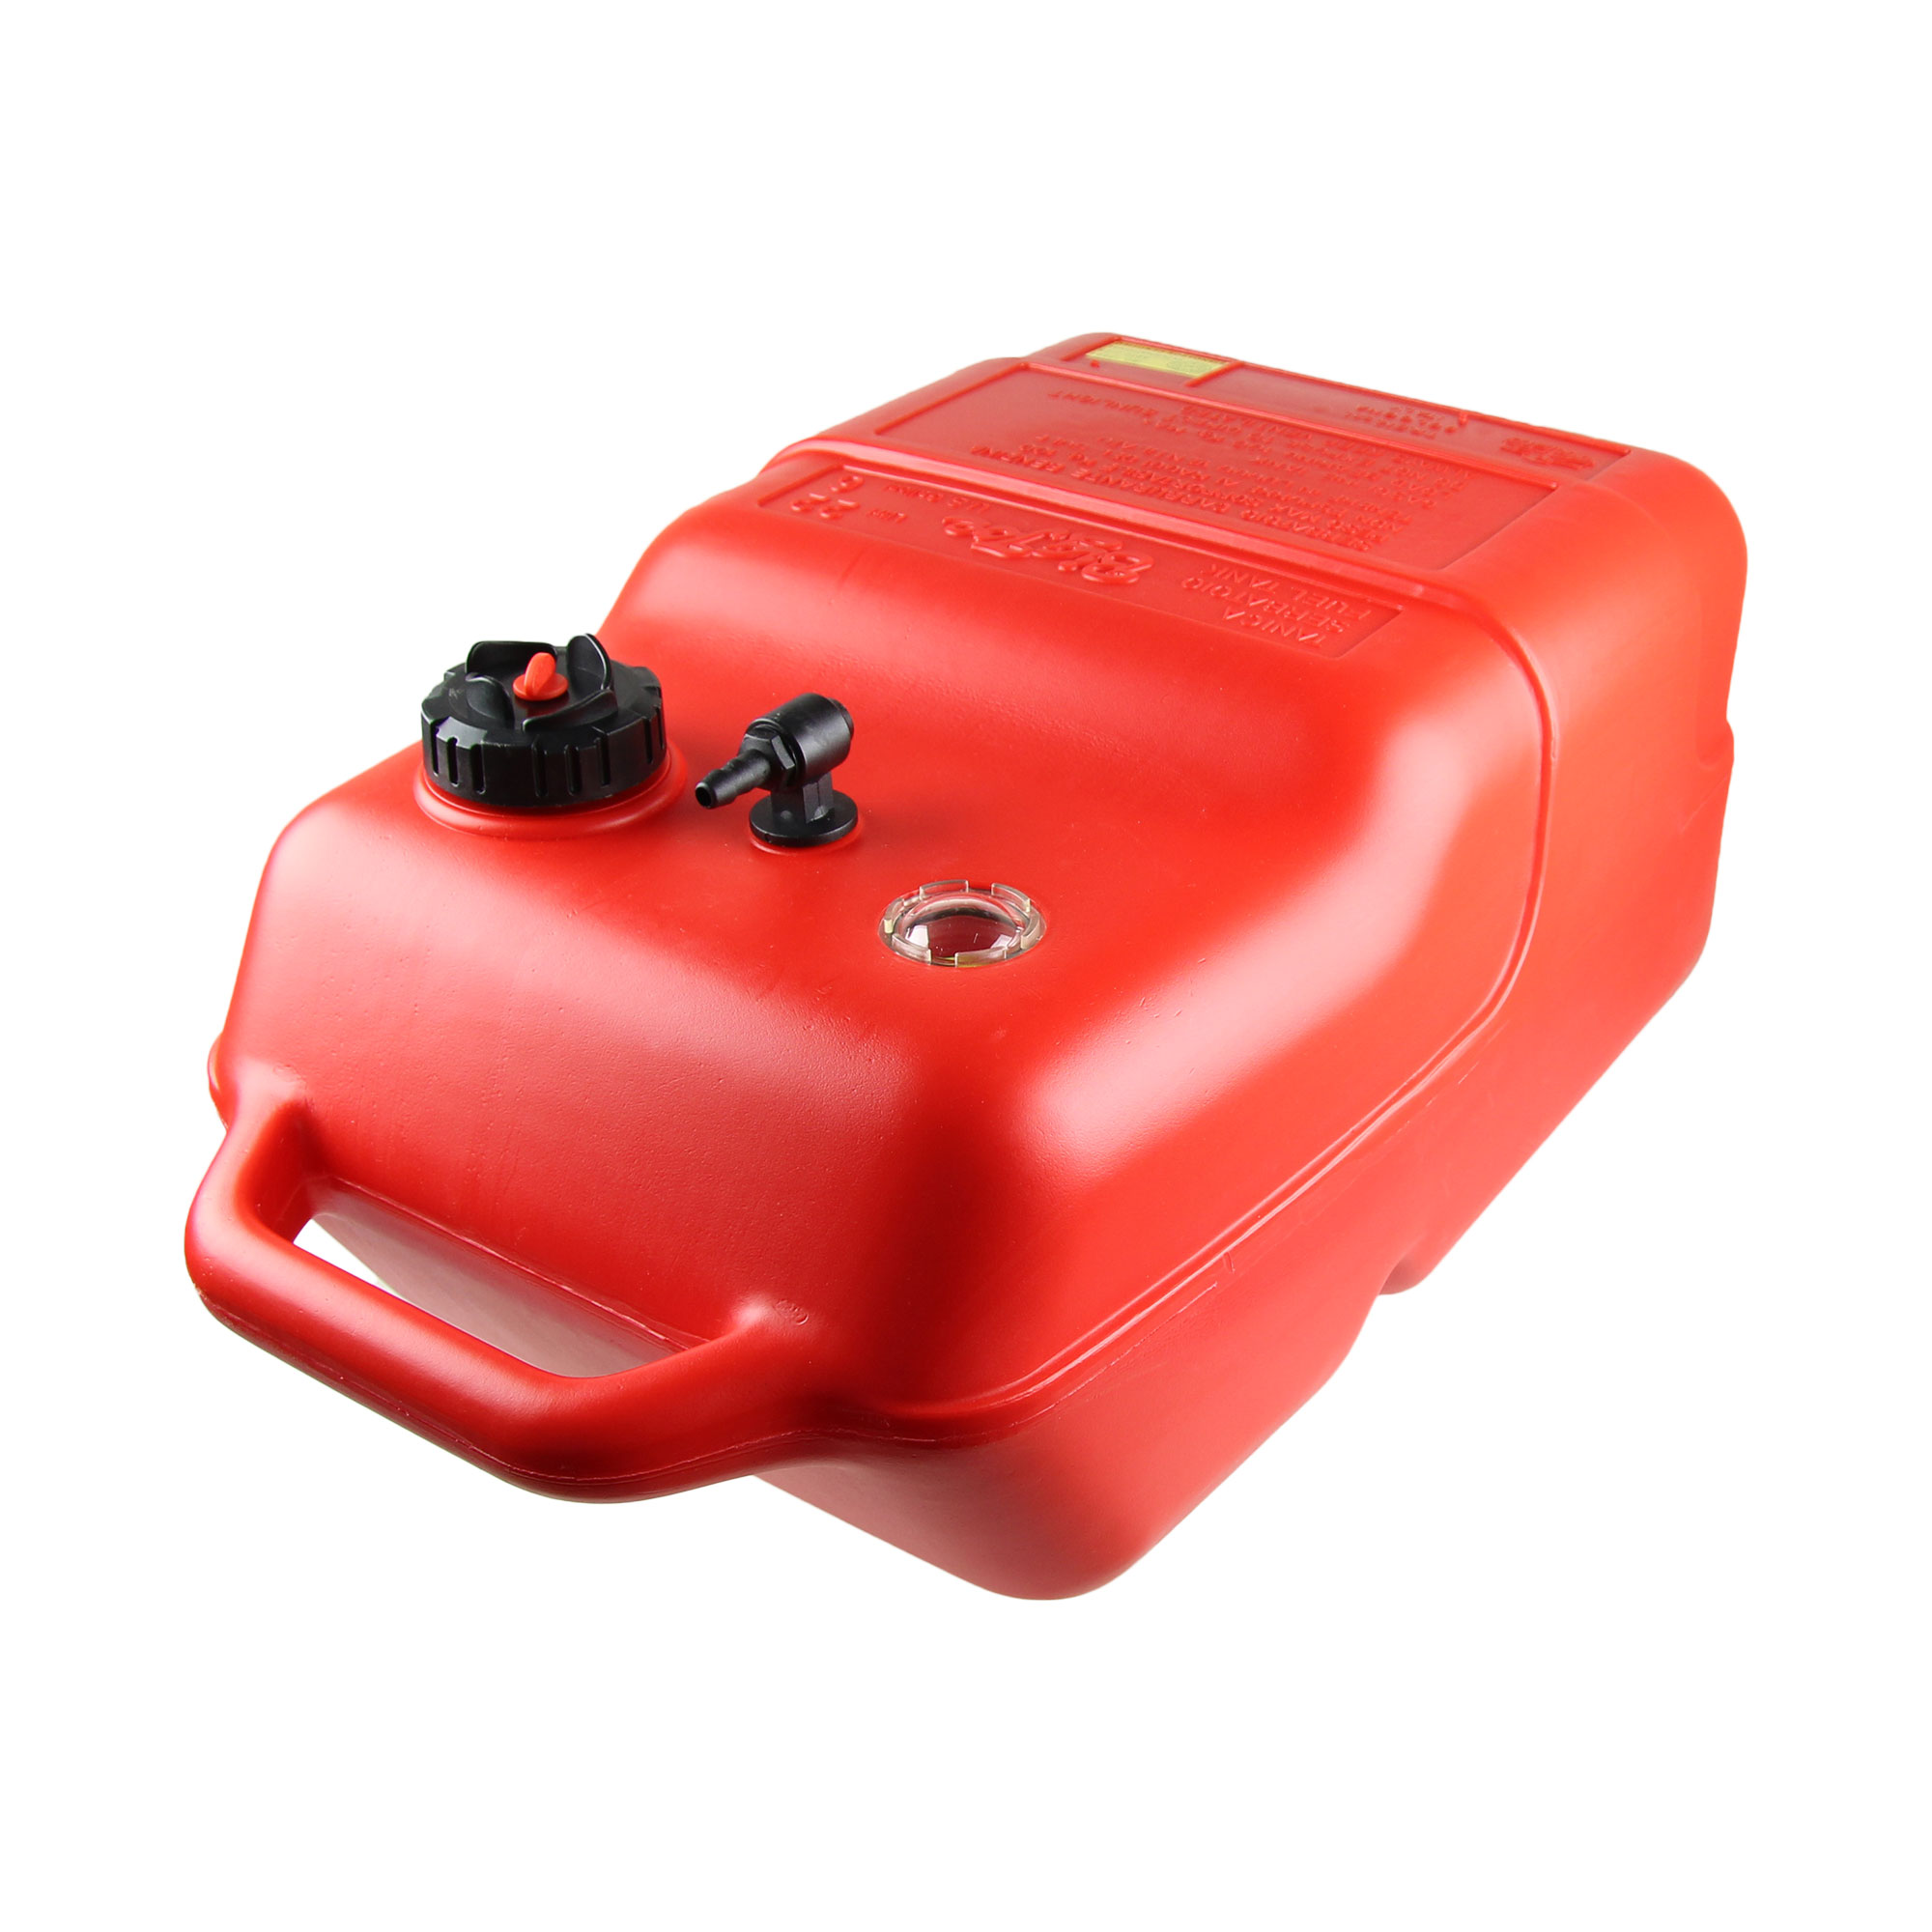 Fuel tank red / Connection nipple (8mm) / level indicator manual